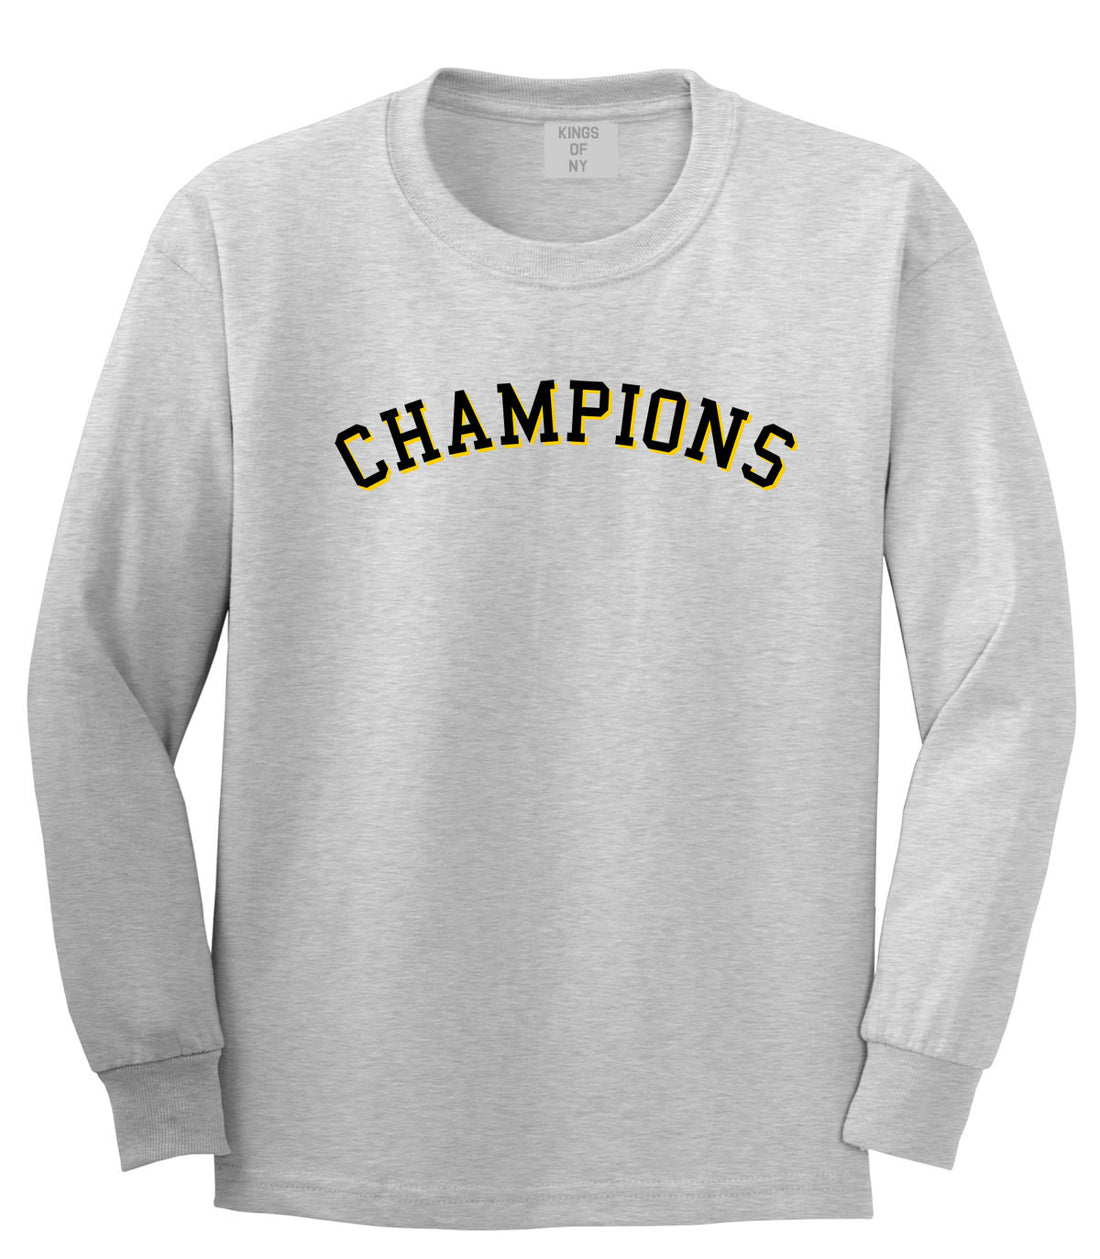 Champions Boys Kids Long Sleeve T-Shirt in Grey by Kings Of NY